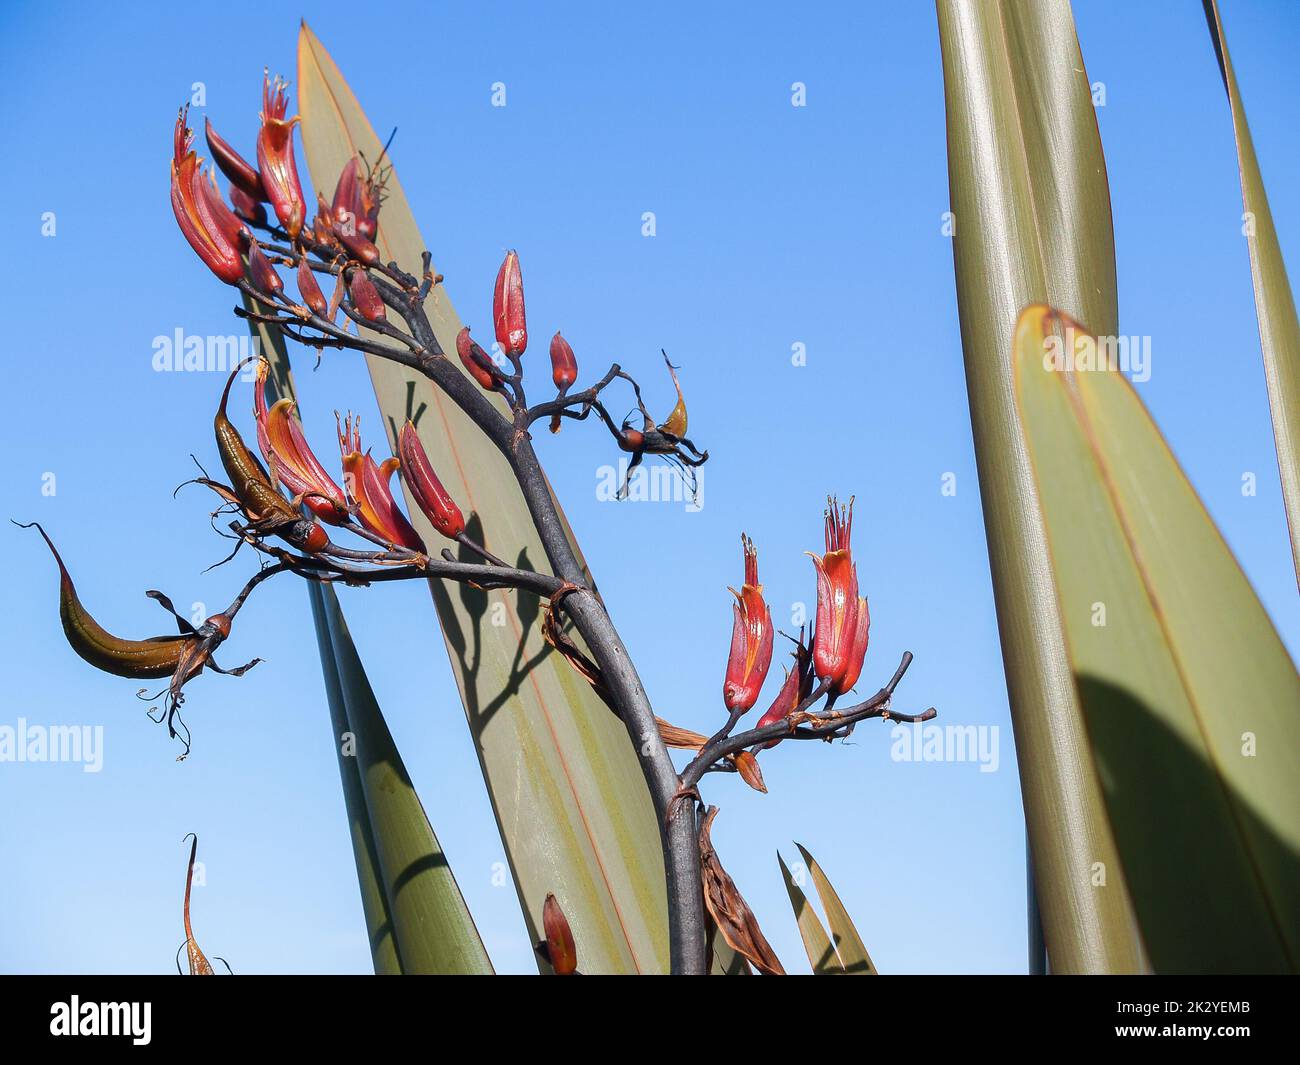 New Zealand flax flower stem closeup against long spear shaped leaves and blue sky background. Stock Photo